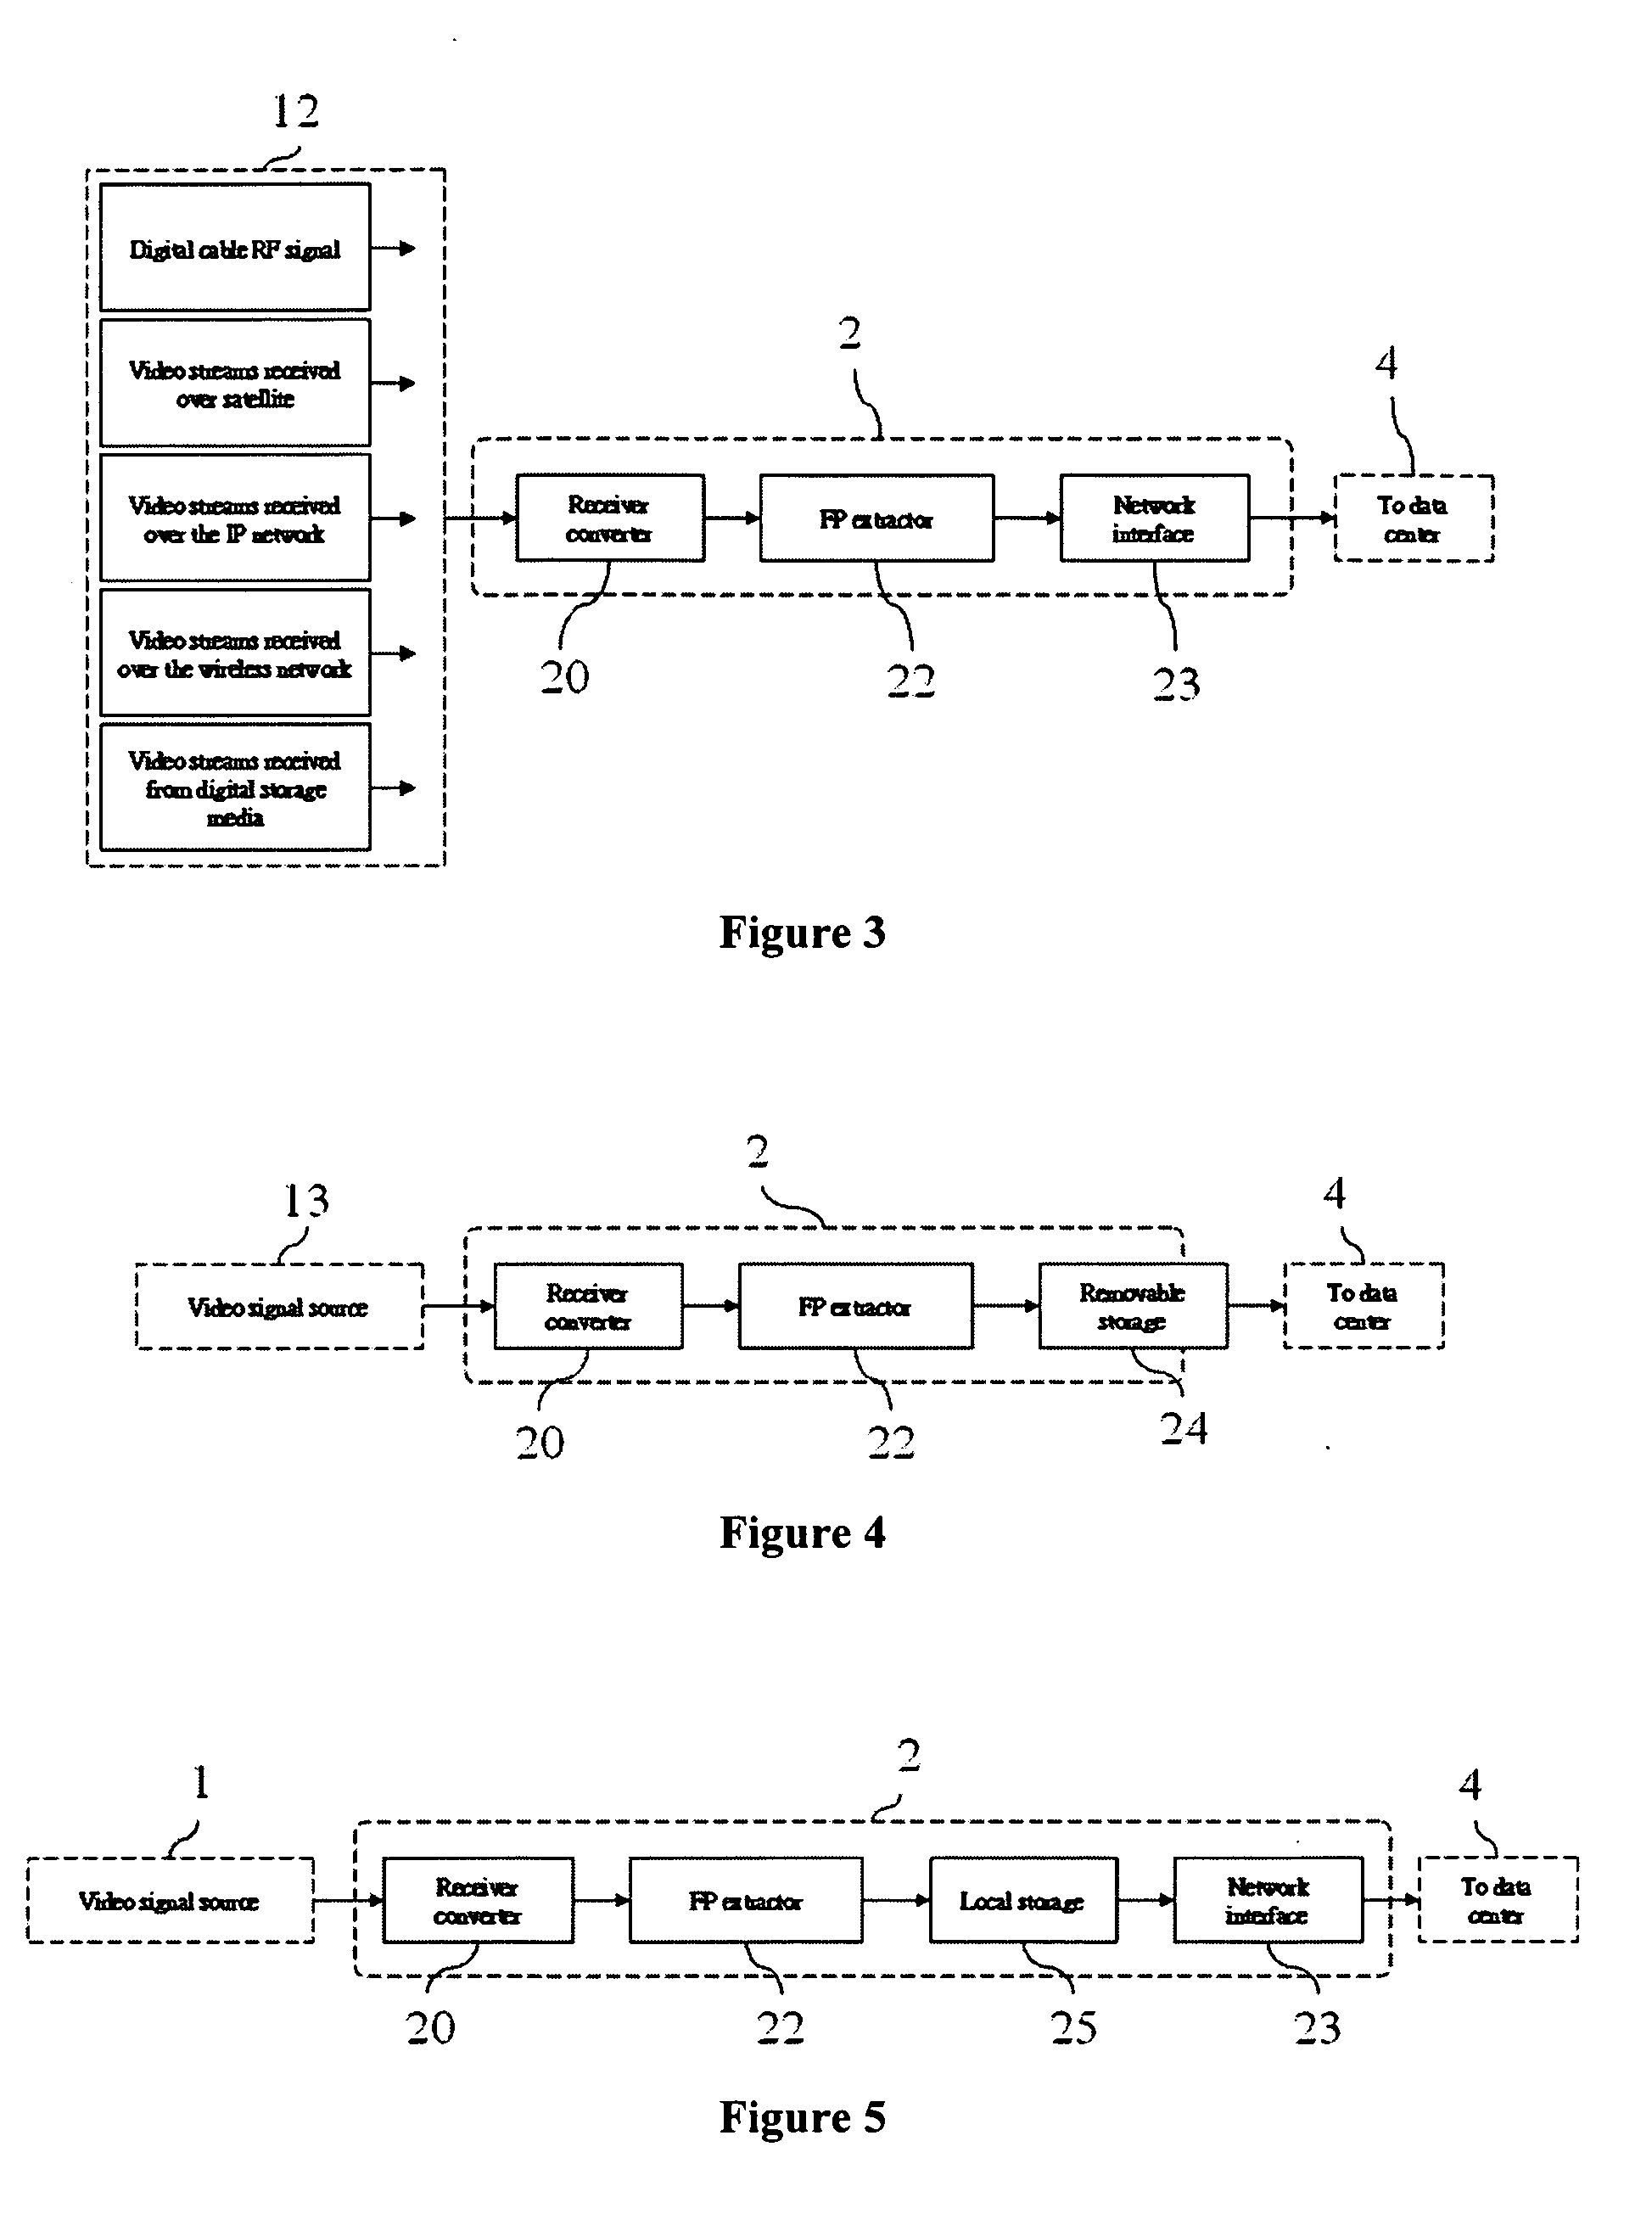 System for Facilitating the Search of Video Content